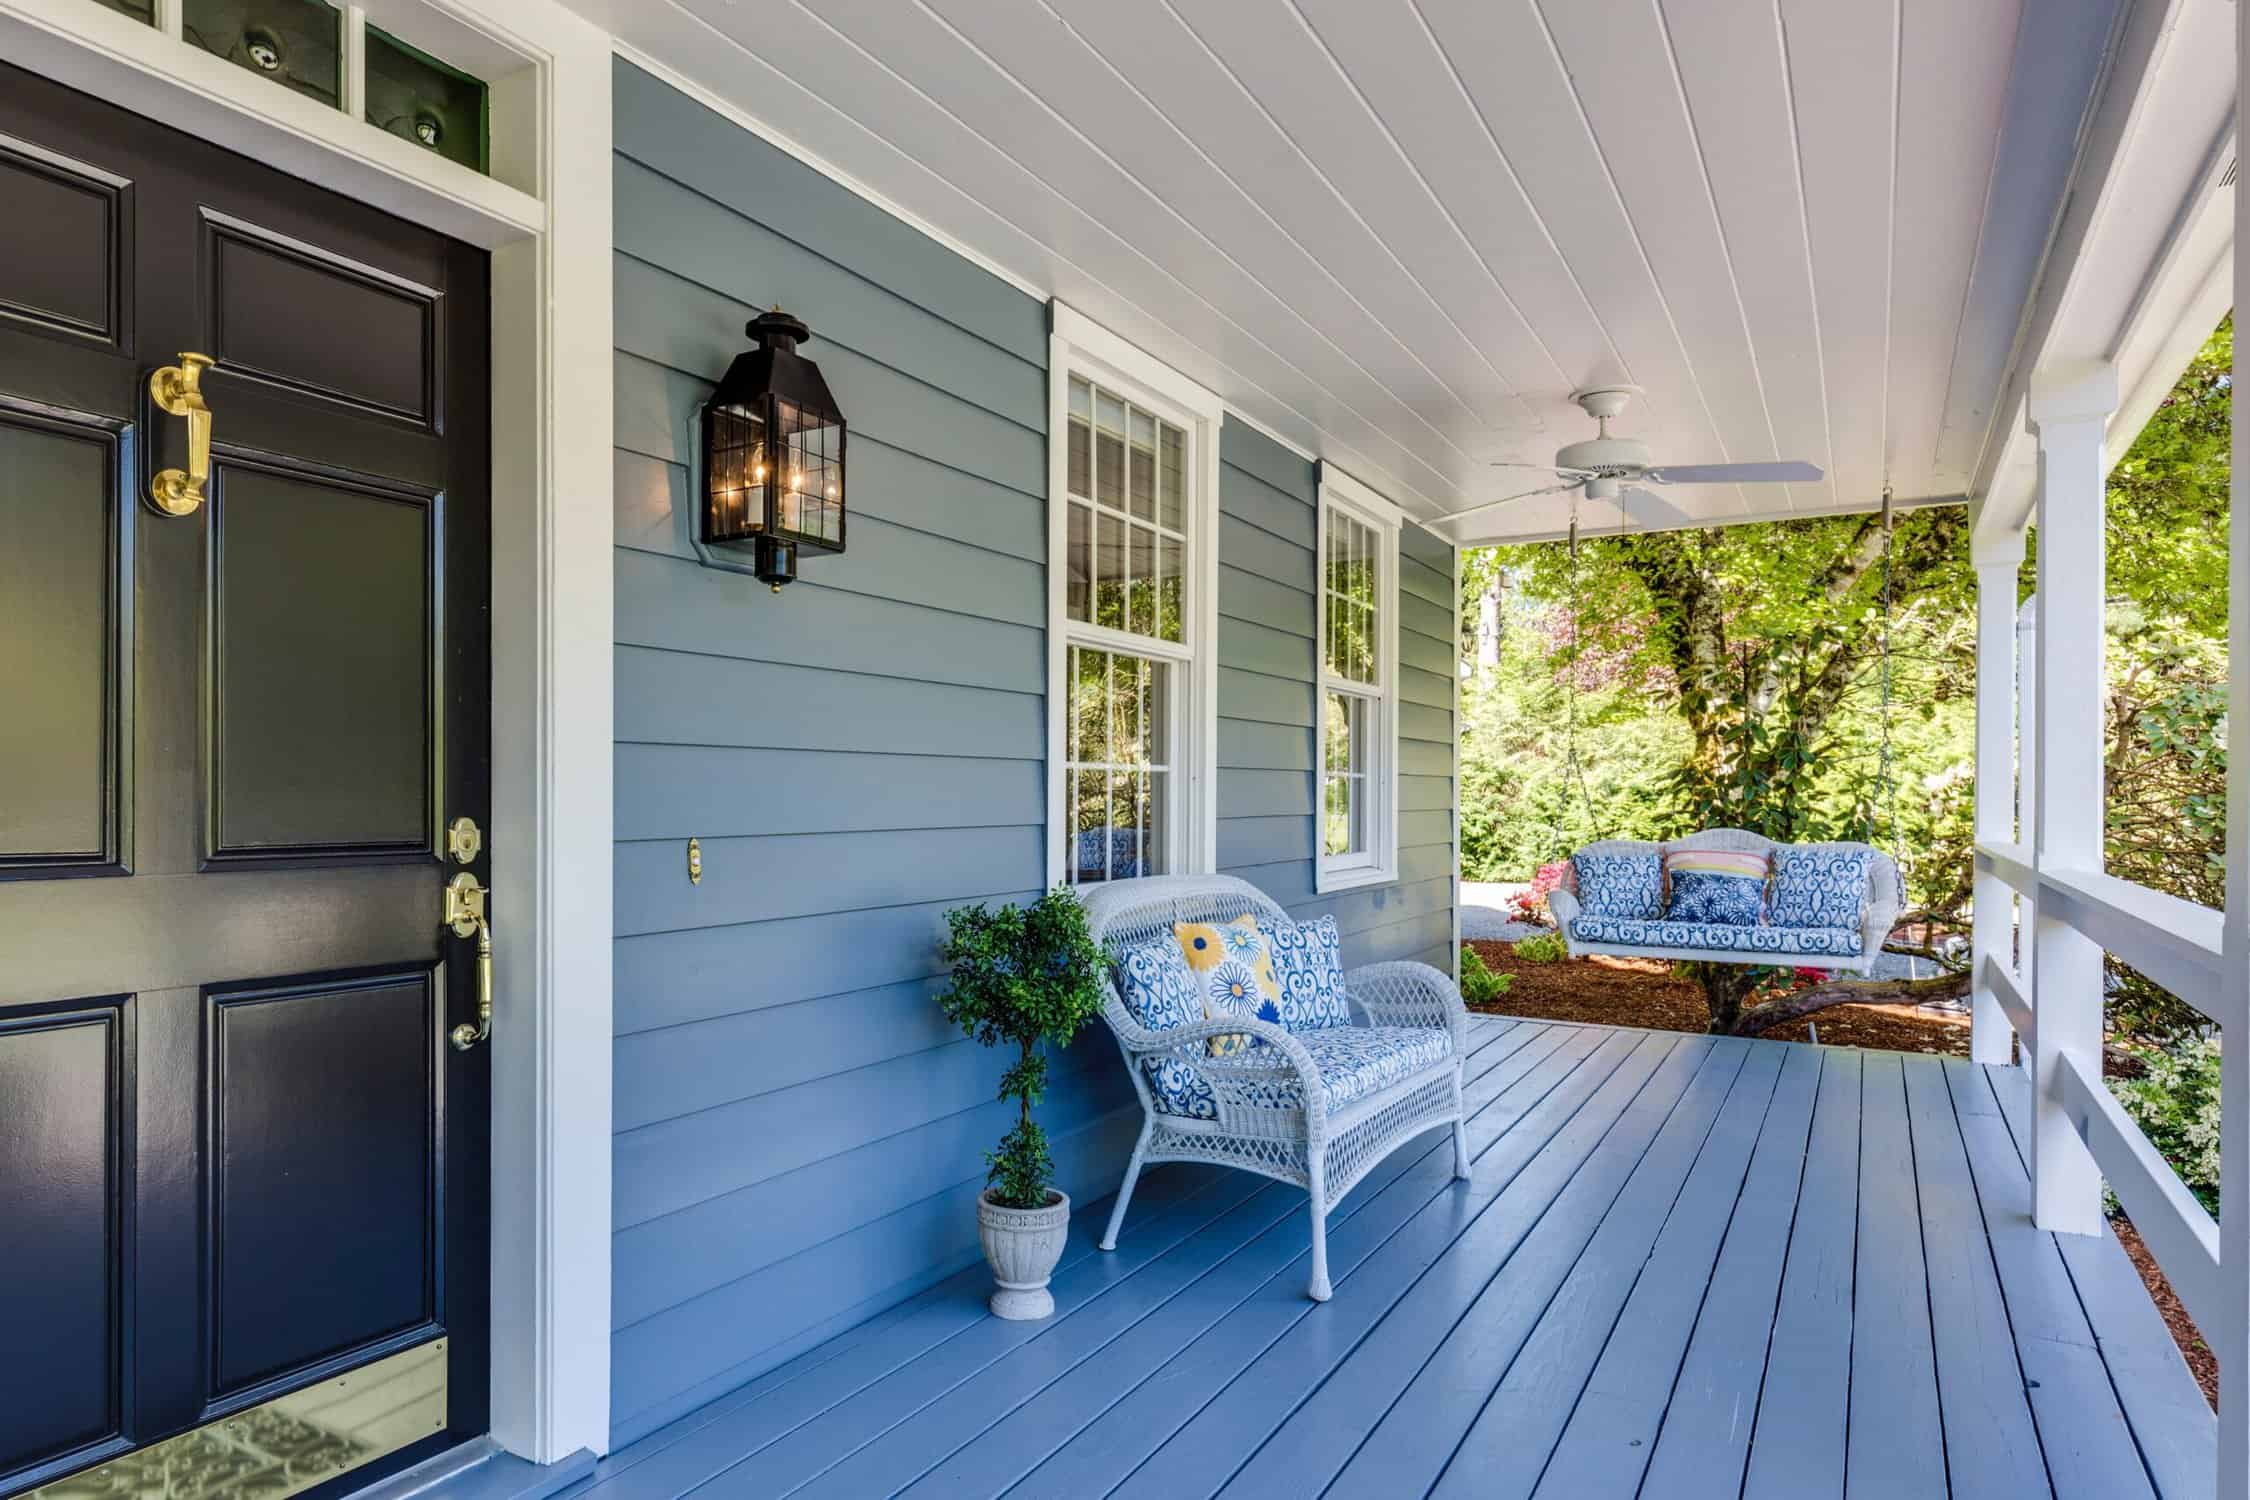 front porch painted in light blue and white with black door, with accent chair and hammock